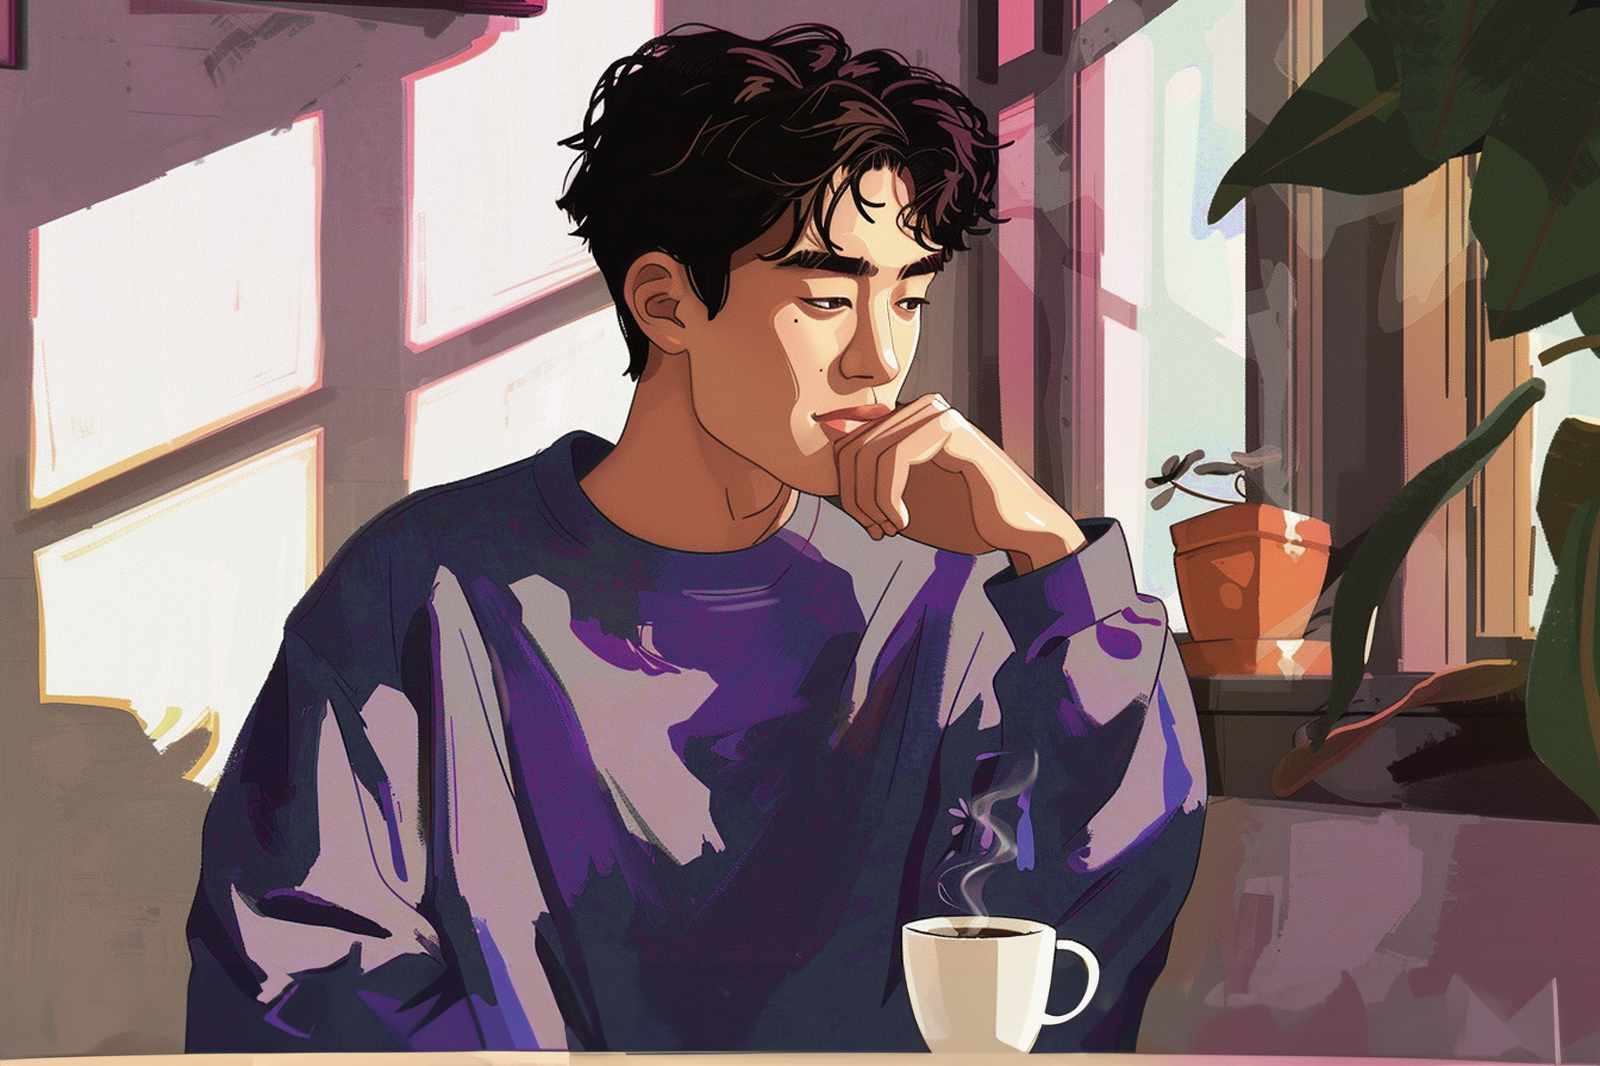 A worried boy sits in his room with a cup of tea in front of him, contemplating his thoughts